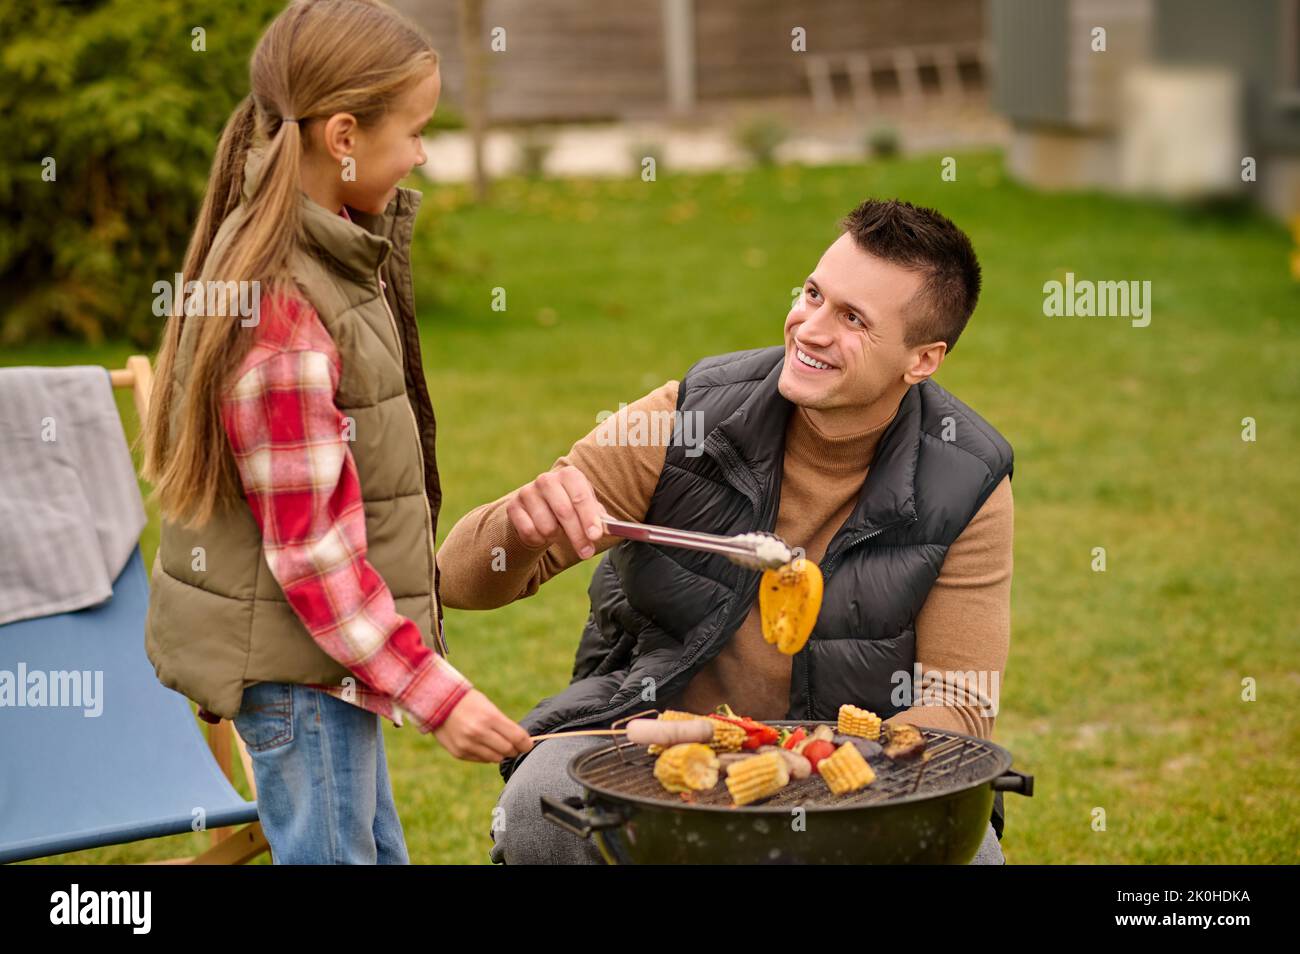 Daughter and dad having a picnic in the backyard Stock Photo